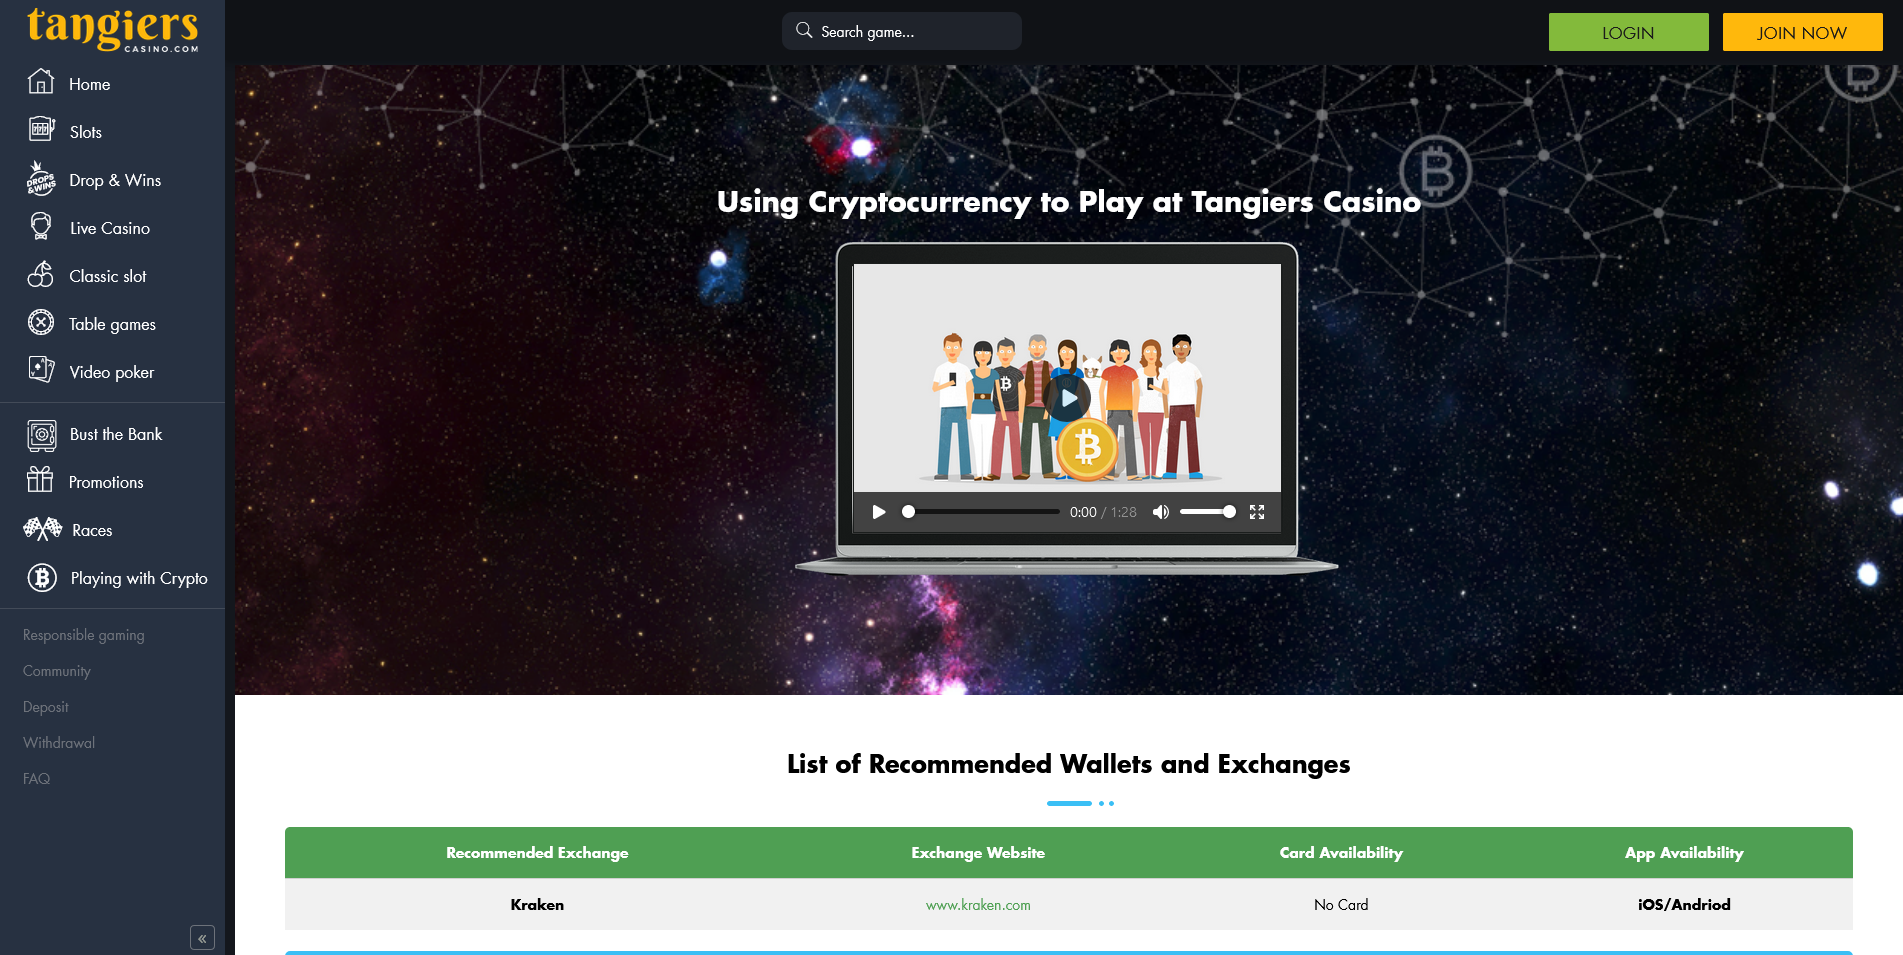 Screenshot of the Tangiers Casino Crypto info page